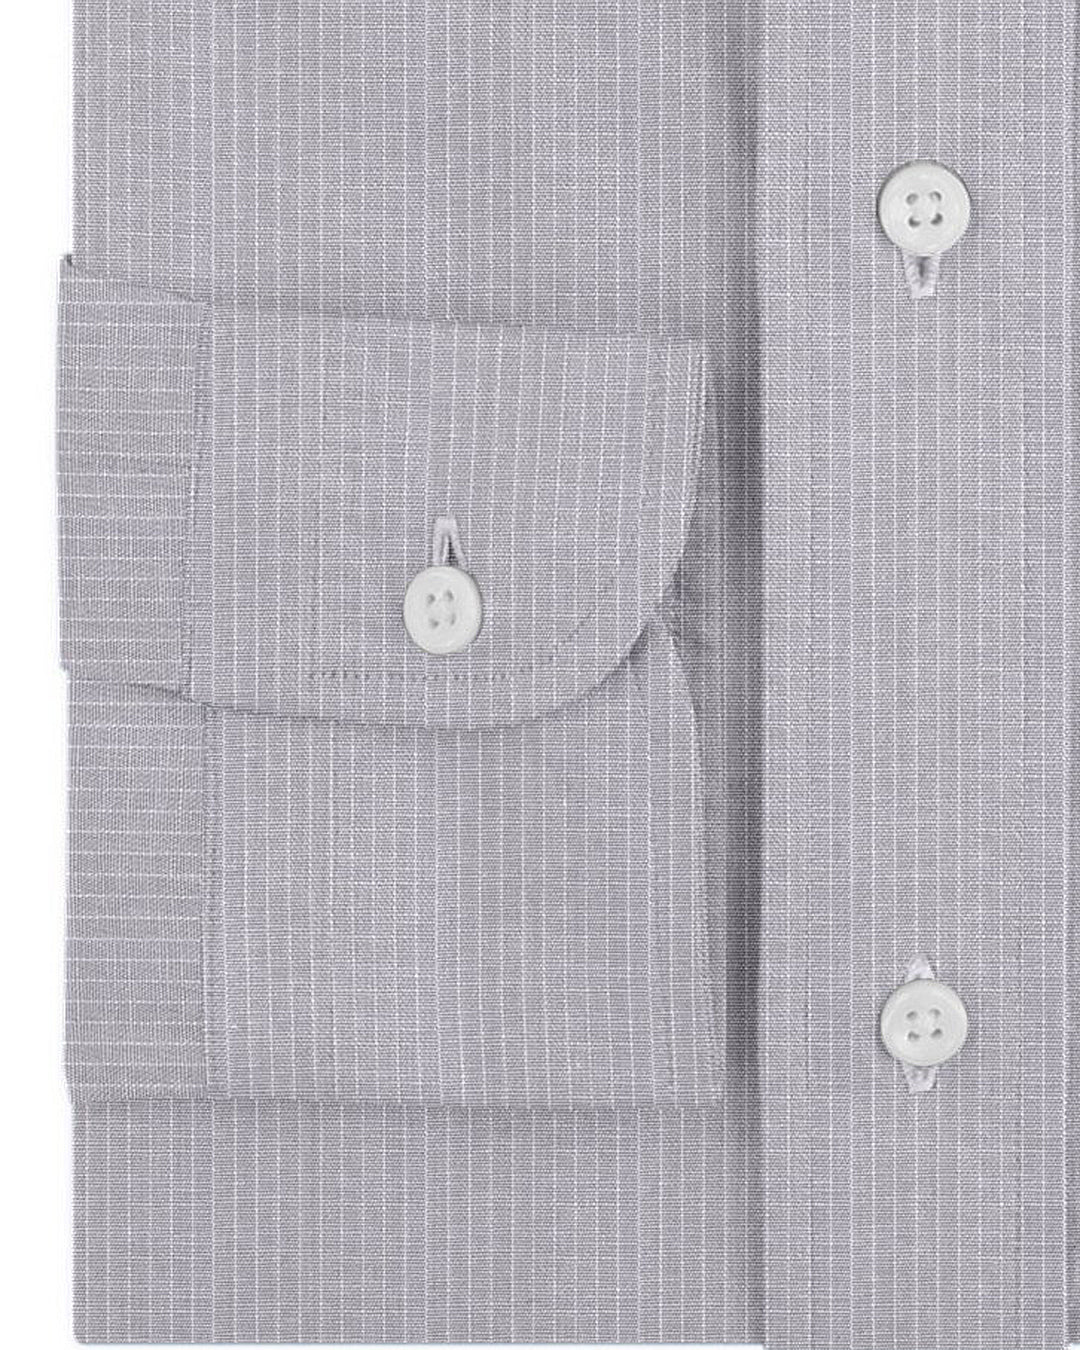 Cuff of the custom linen shirt for men in grey with thin white stripes by Luxire Clothing